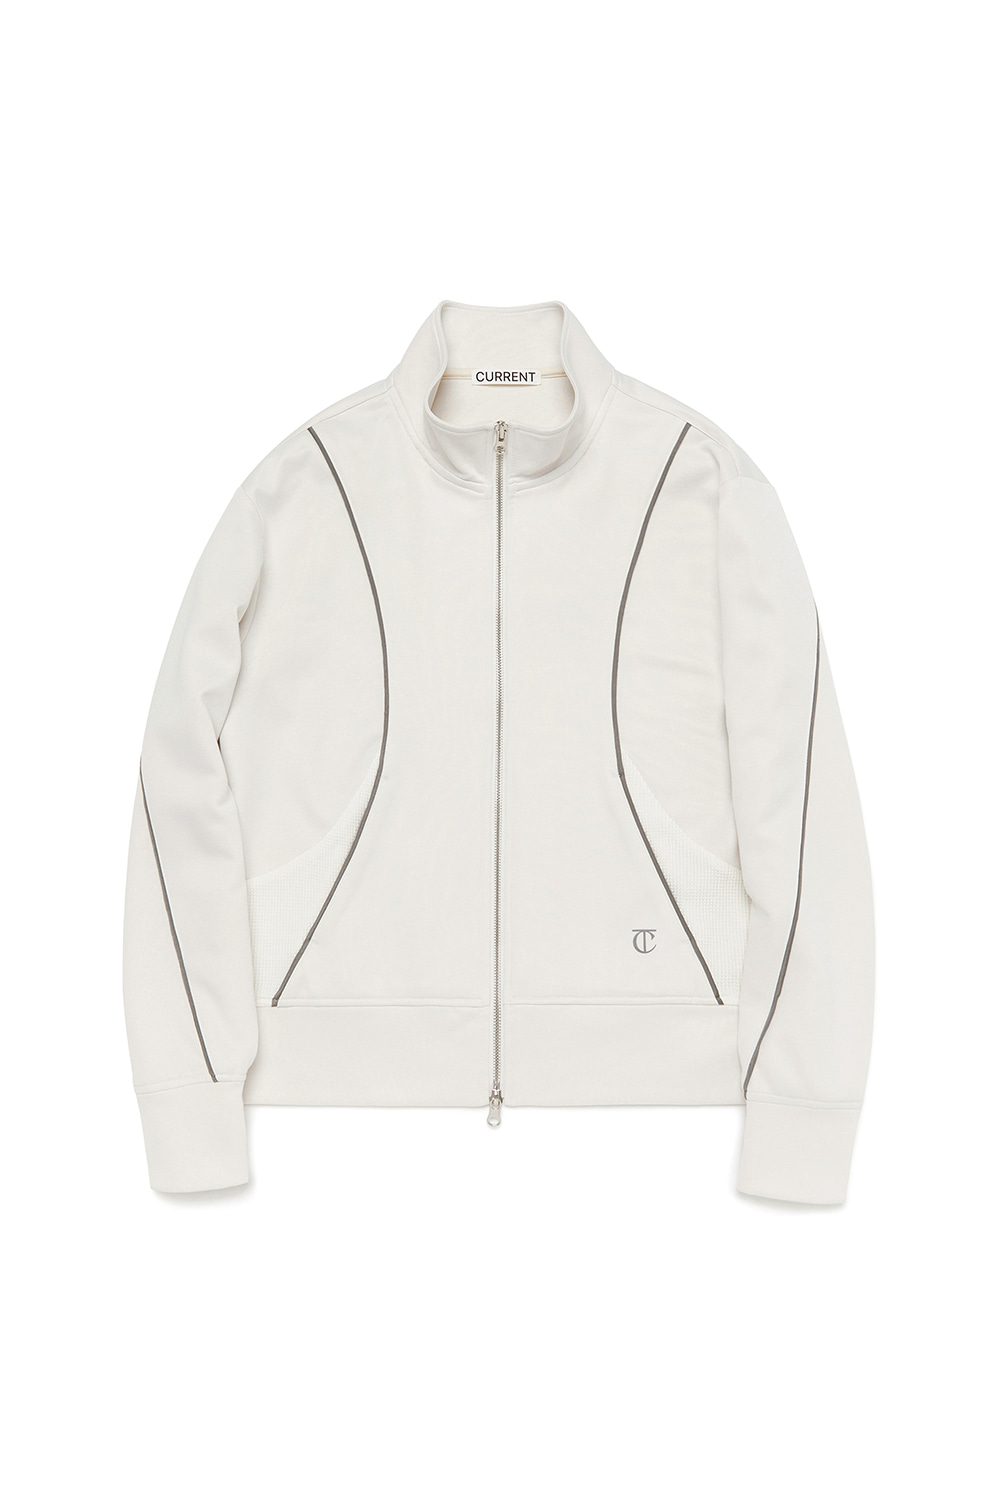 ASSYMETRIC JERSEY ZIP UP [OFF WHITE]		